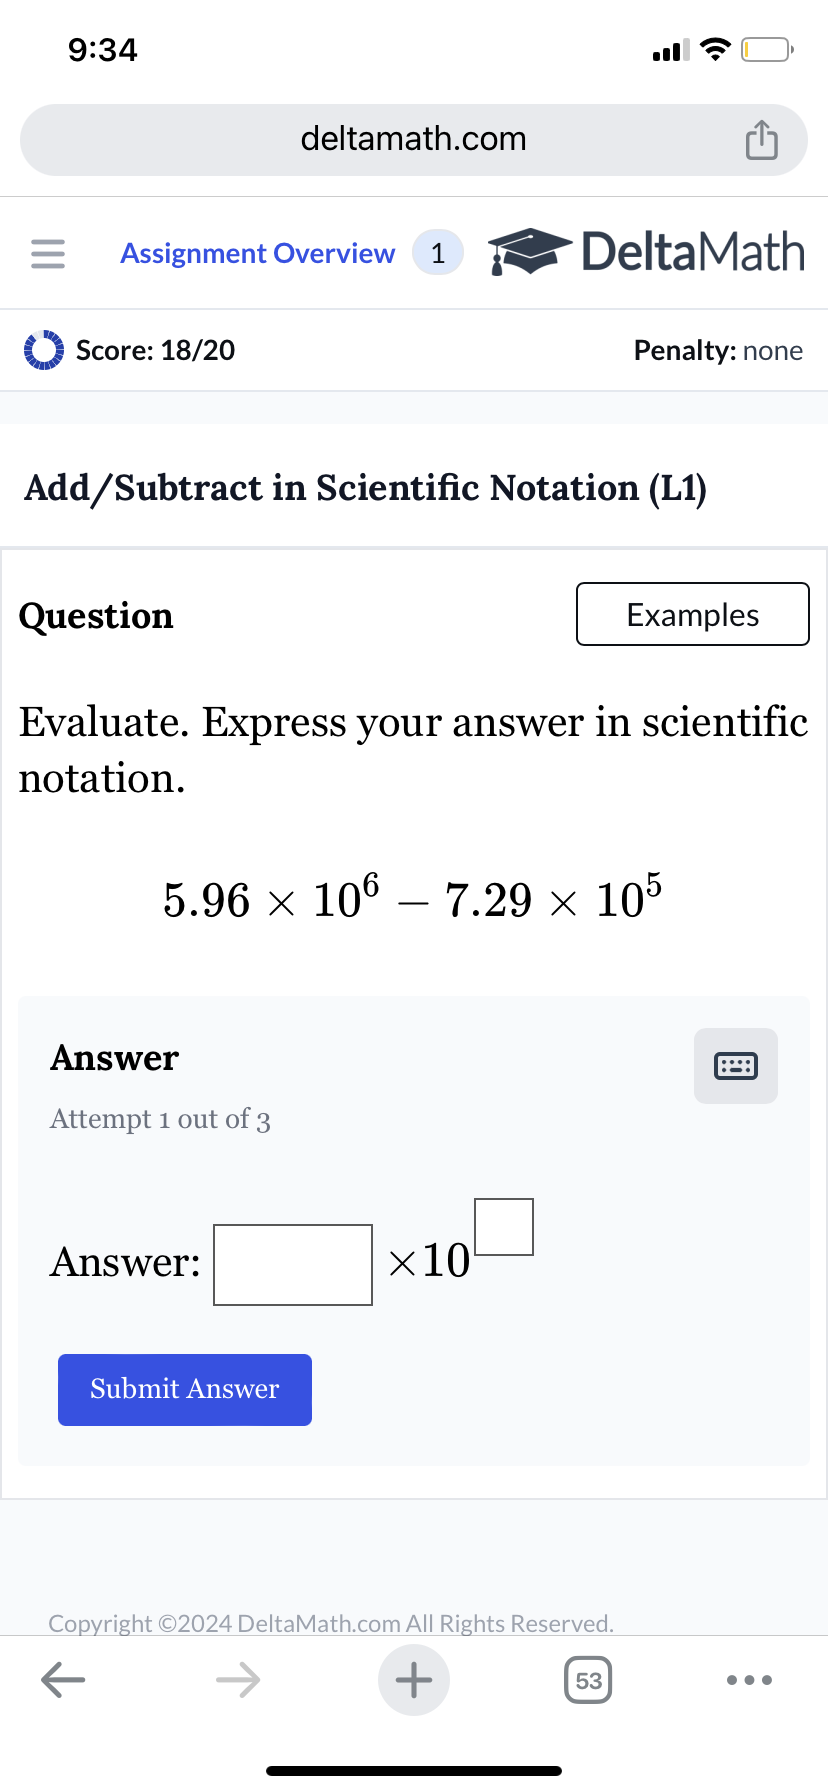 9:34
deltamath.com
= Assignment Overview 1
DeltaMath
Score: 18/20
Penalty: none
Add/Subtract in Scientific Notation (L1)
Question
Examples
Evaluate. Express your answer in scientific
notation.
5.96 × 106 – 7.29 × 105
-
Answer
Attempt 1 out of 3
Answer:
Submit Answer
×10
Copyright ©2024 DeltaMath.com All Rights Reserved.
←
+
53